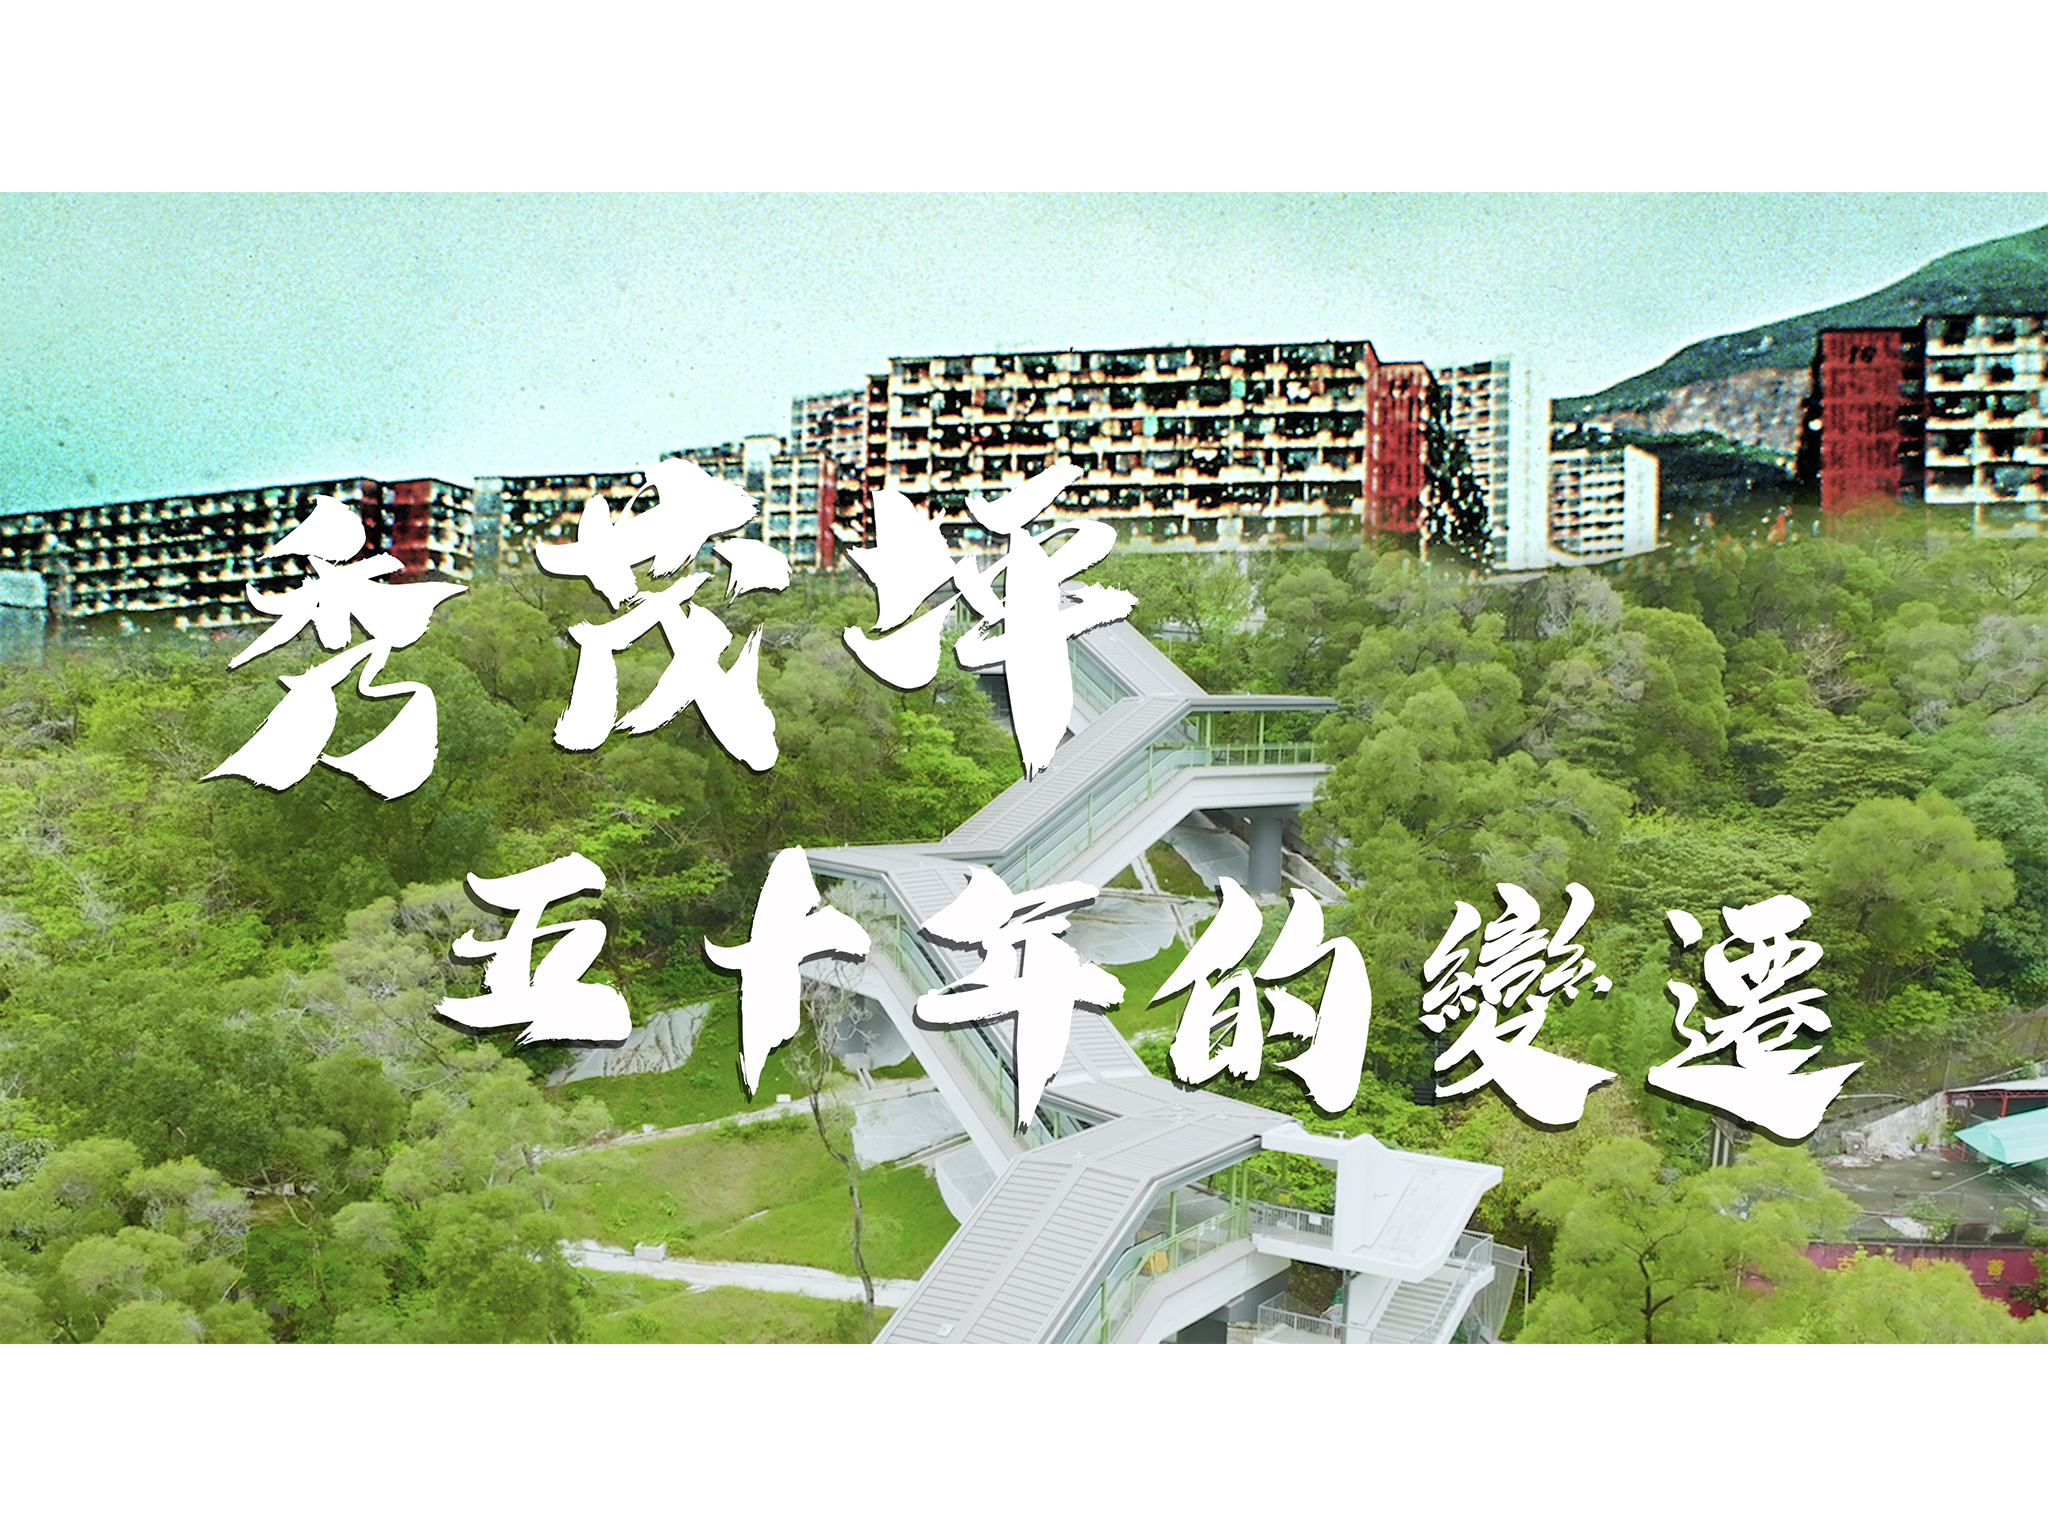 The promotional video “Development of Sau Mau Ping in 50 Years“ had released on CEDD YouTube channel, Please visit: https://youtu.be/Xxw7iQp9THc